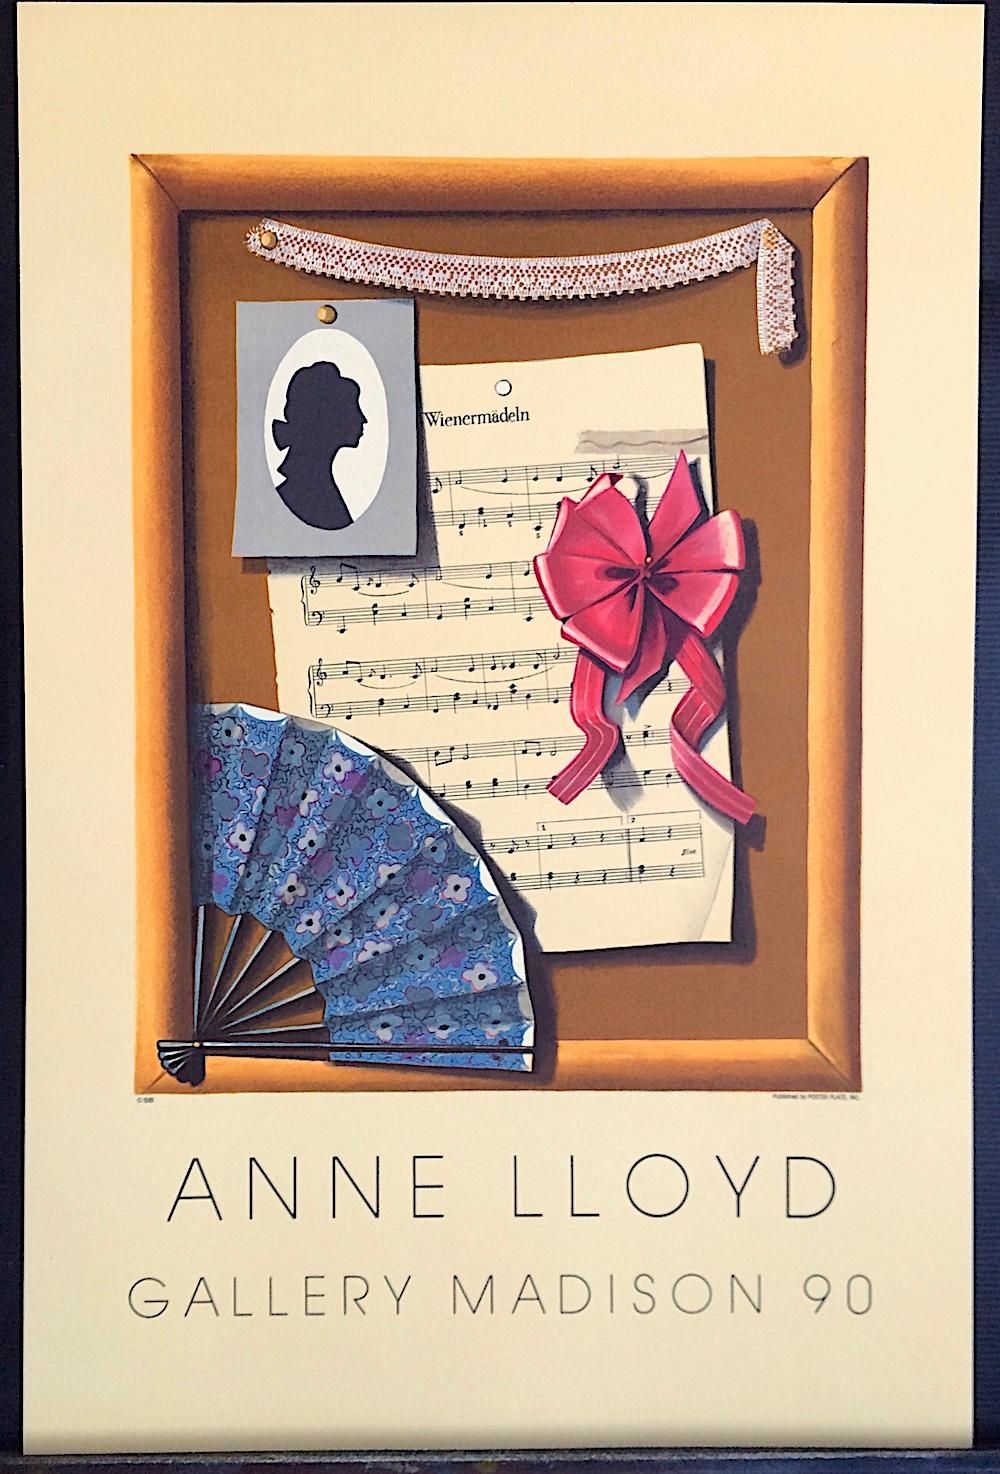 Anne Lloyd’s VIENNESE STILL LIFE is a hand drawn limited edition lithograph printed using hand lithography techniques on archival printmaking paper 100% acid free. From a limited printing run of 300 prints created especially for Ms. Lloyd's NYC Art